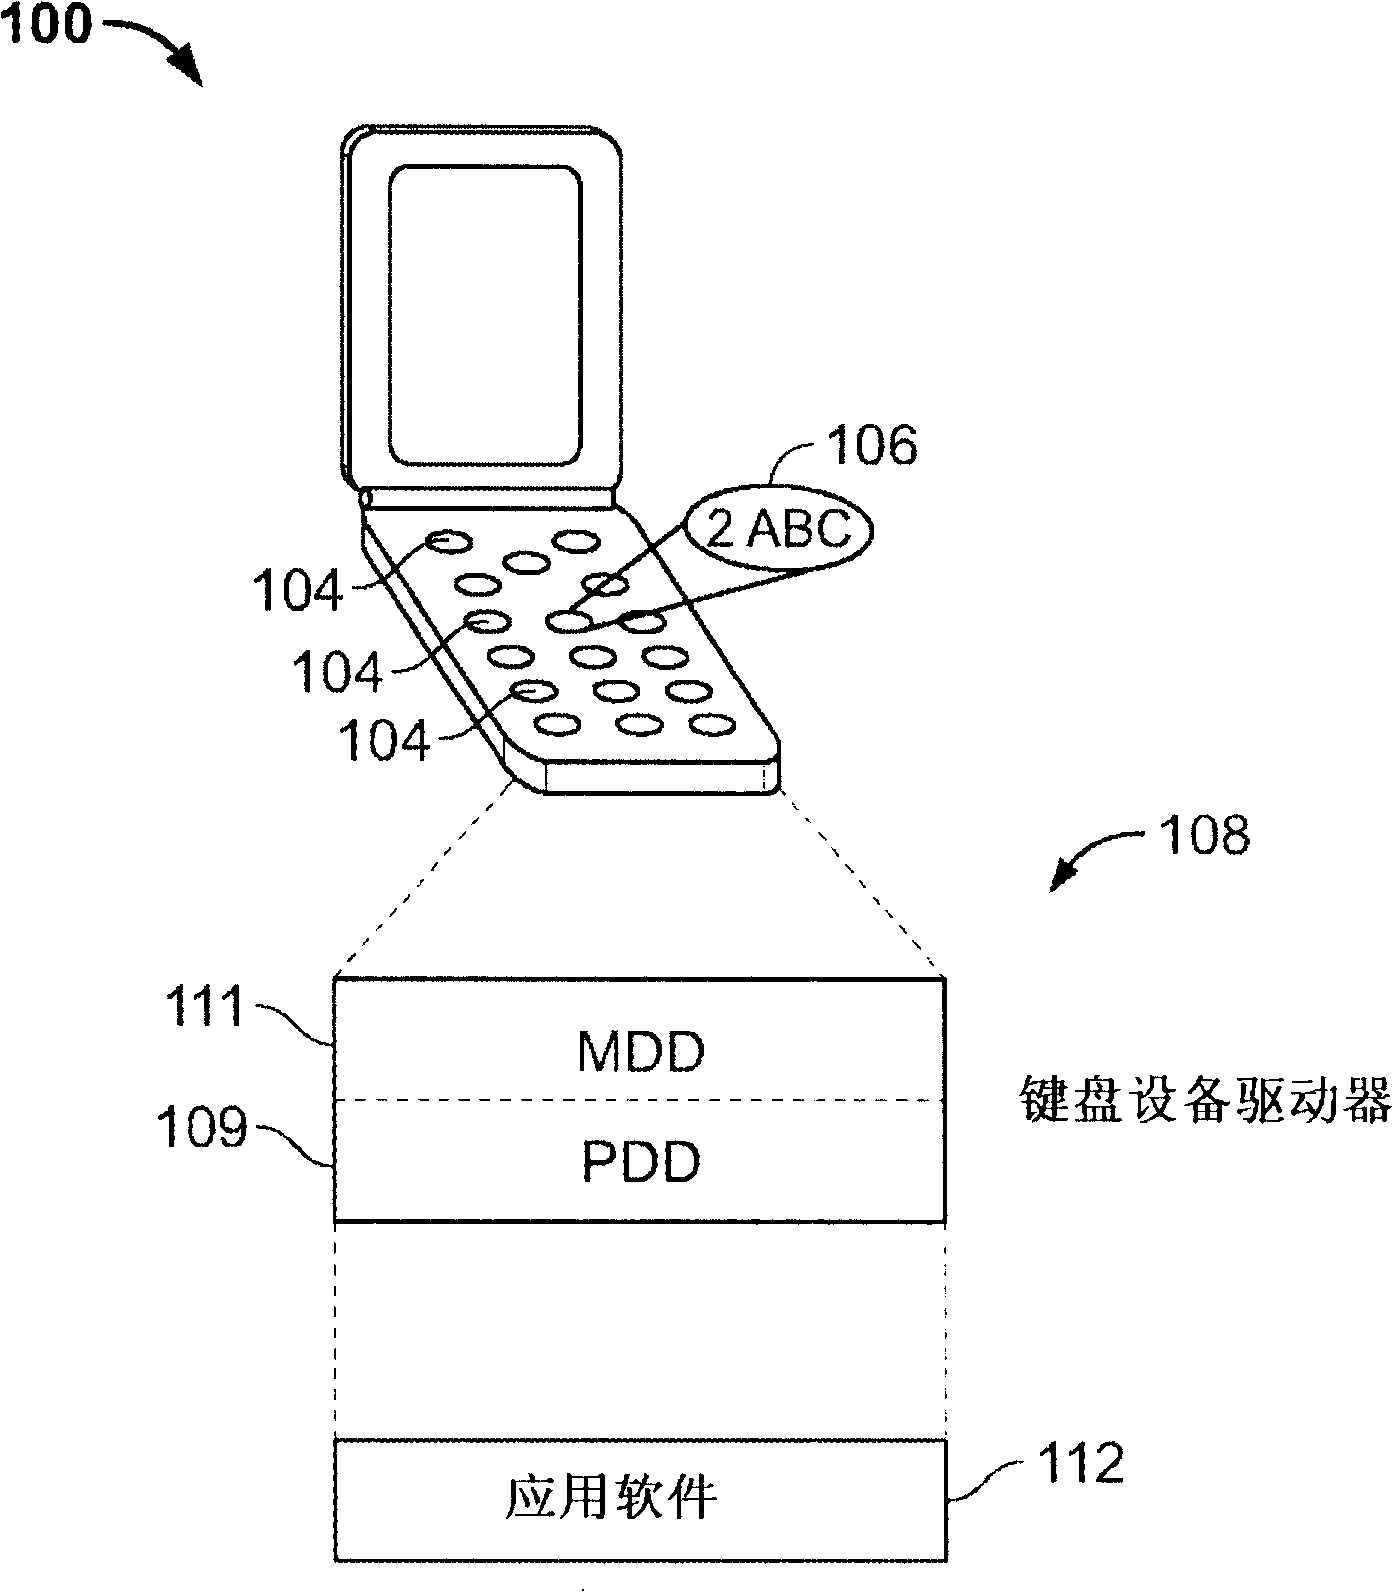 A method of remapping the input elements of a hand-held device